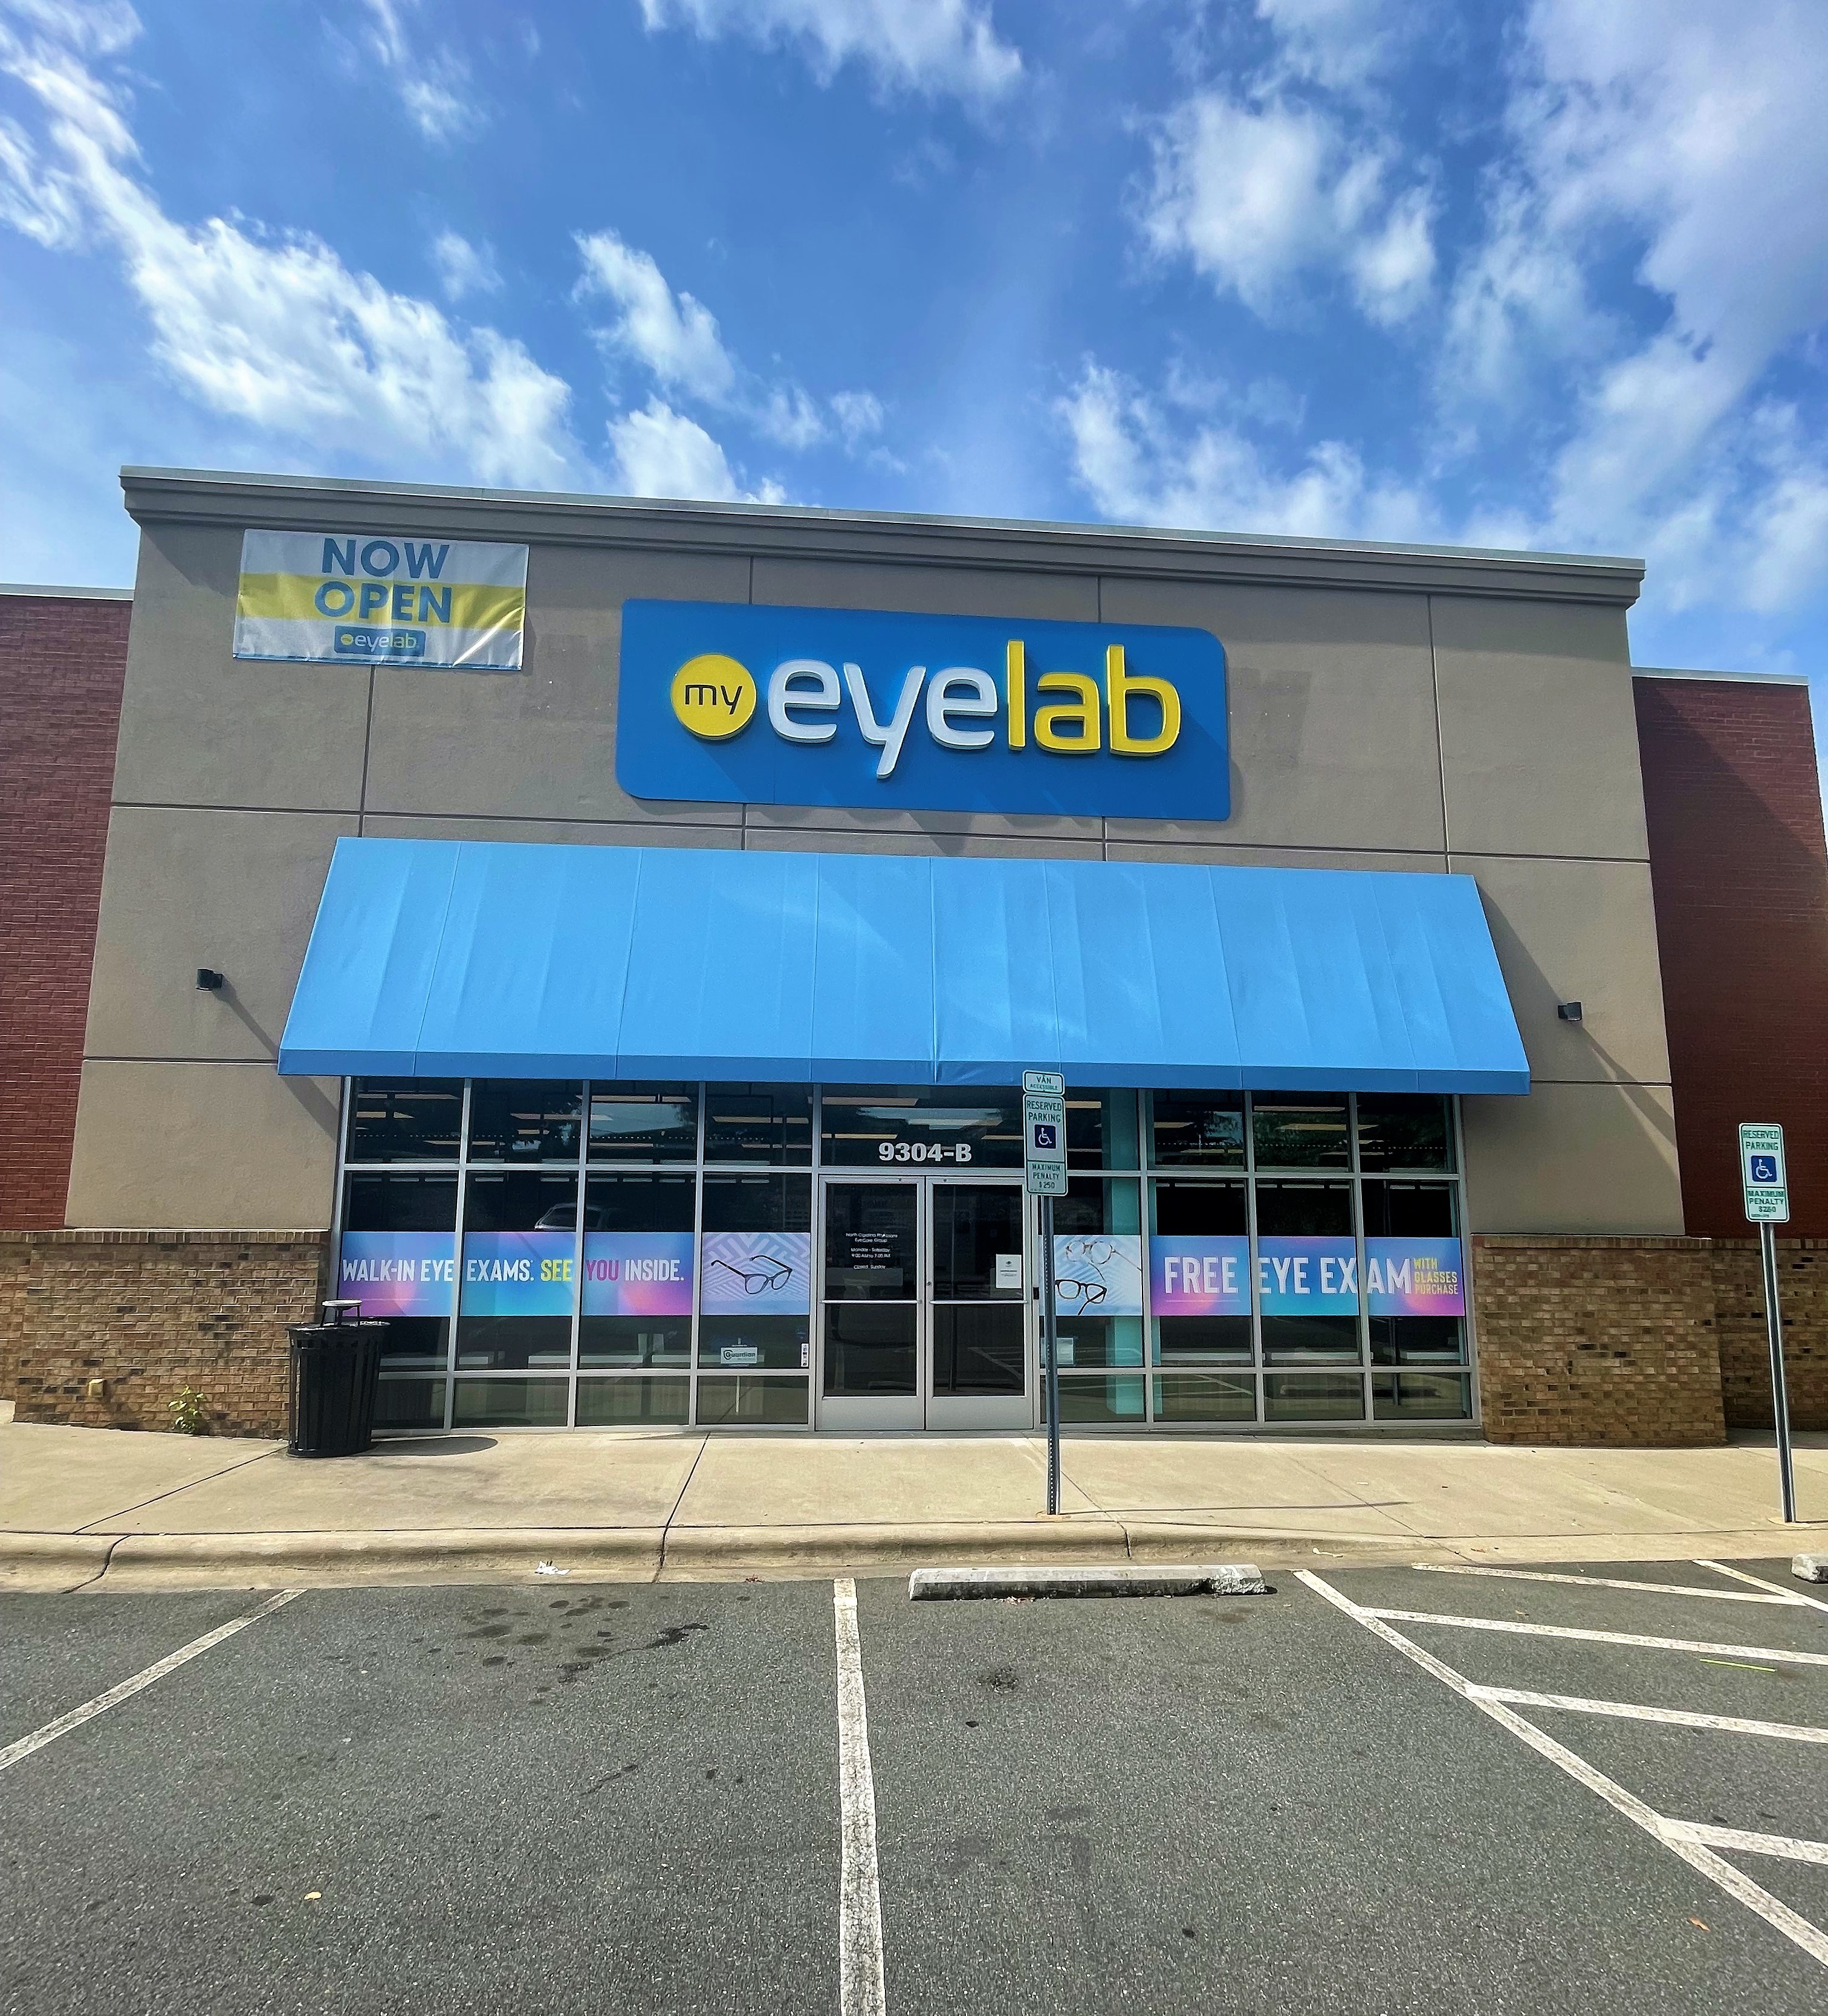 Storefront at My Eyelab optical store in Wedgewood, Charlotte, NC 28216